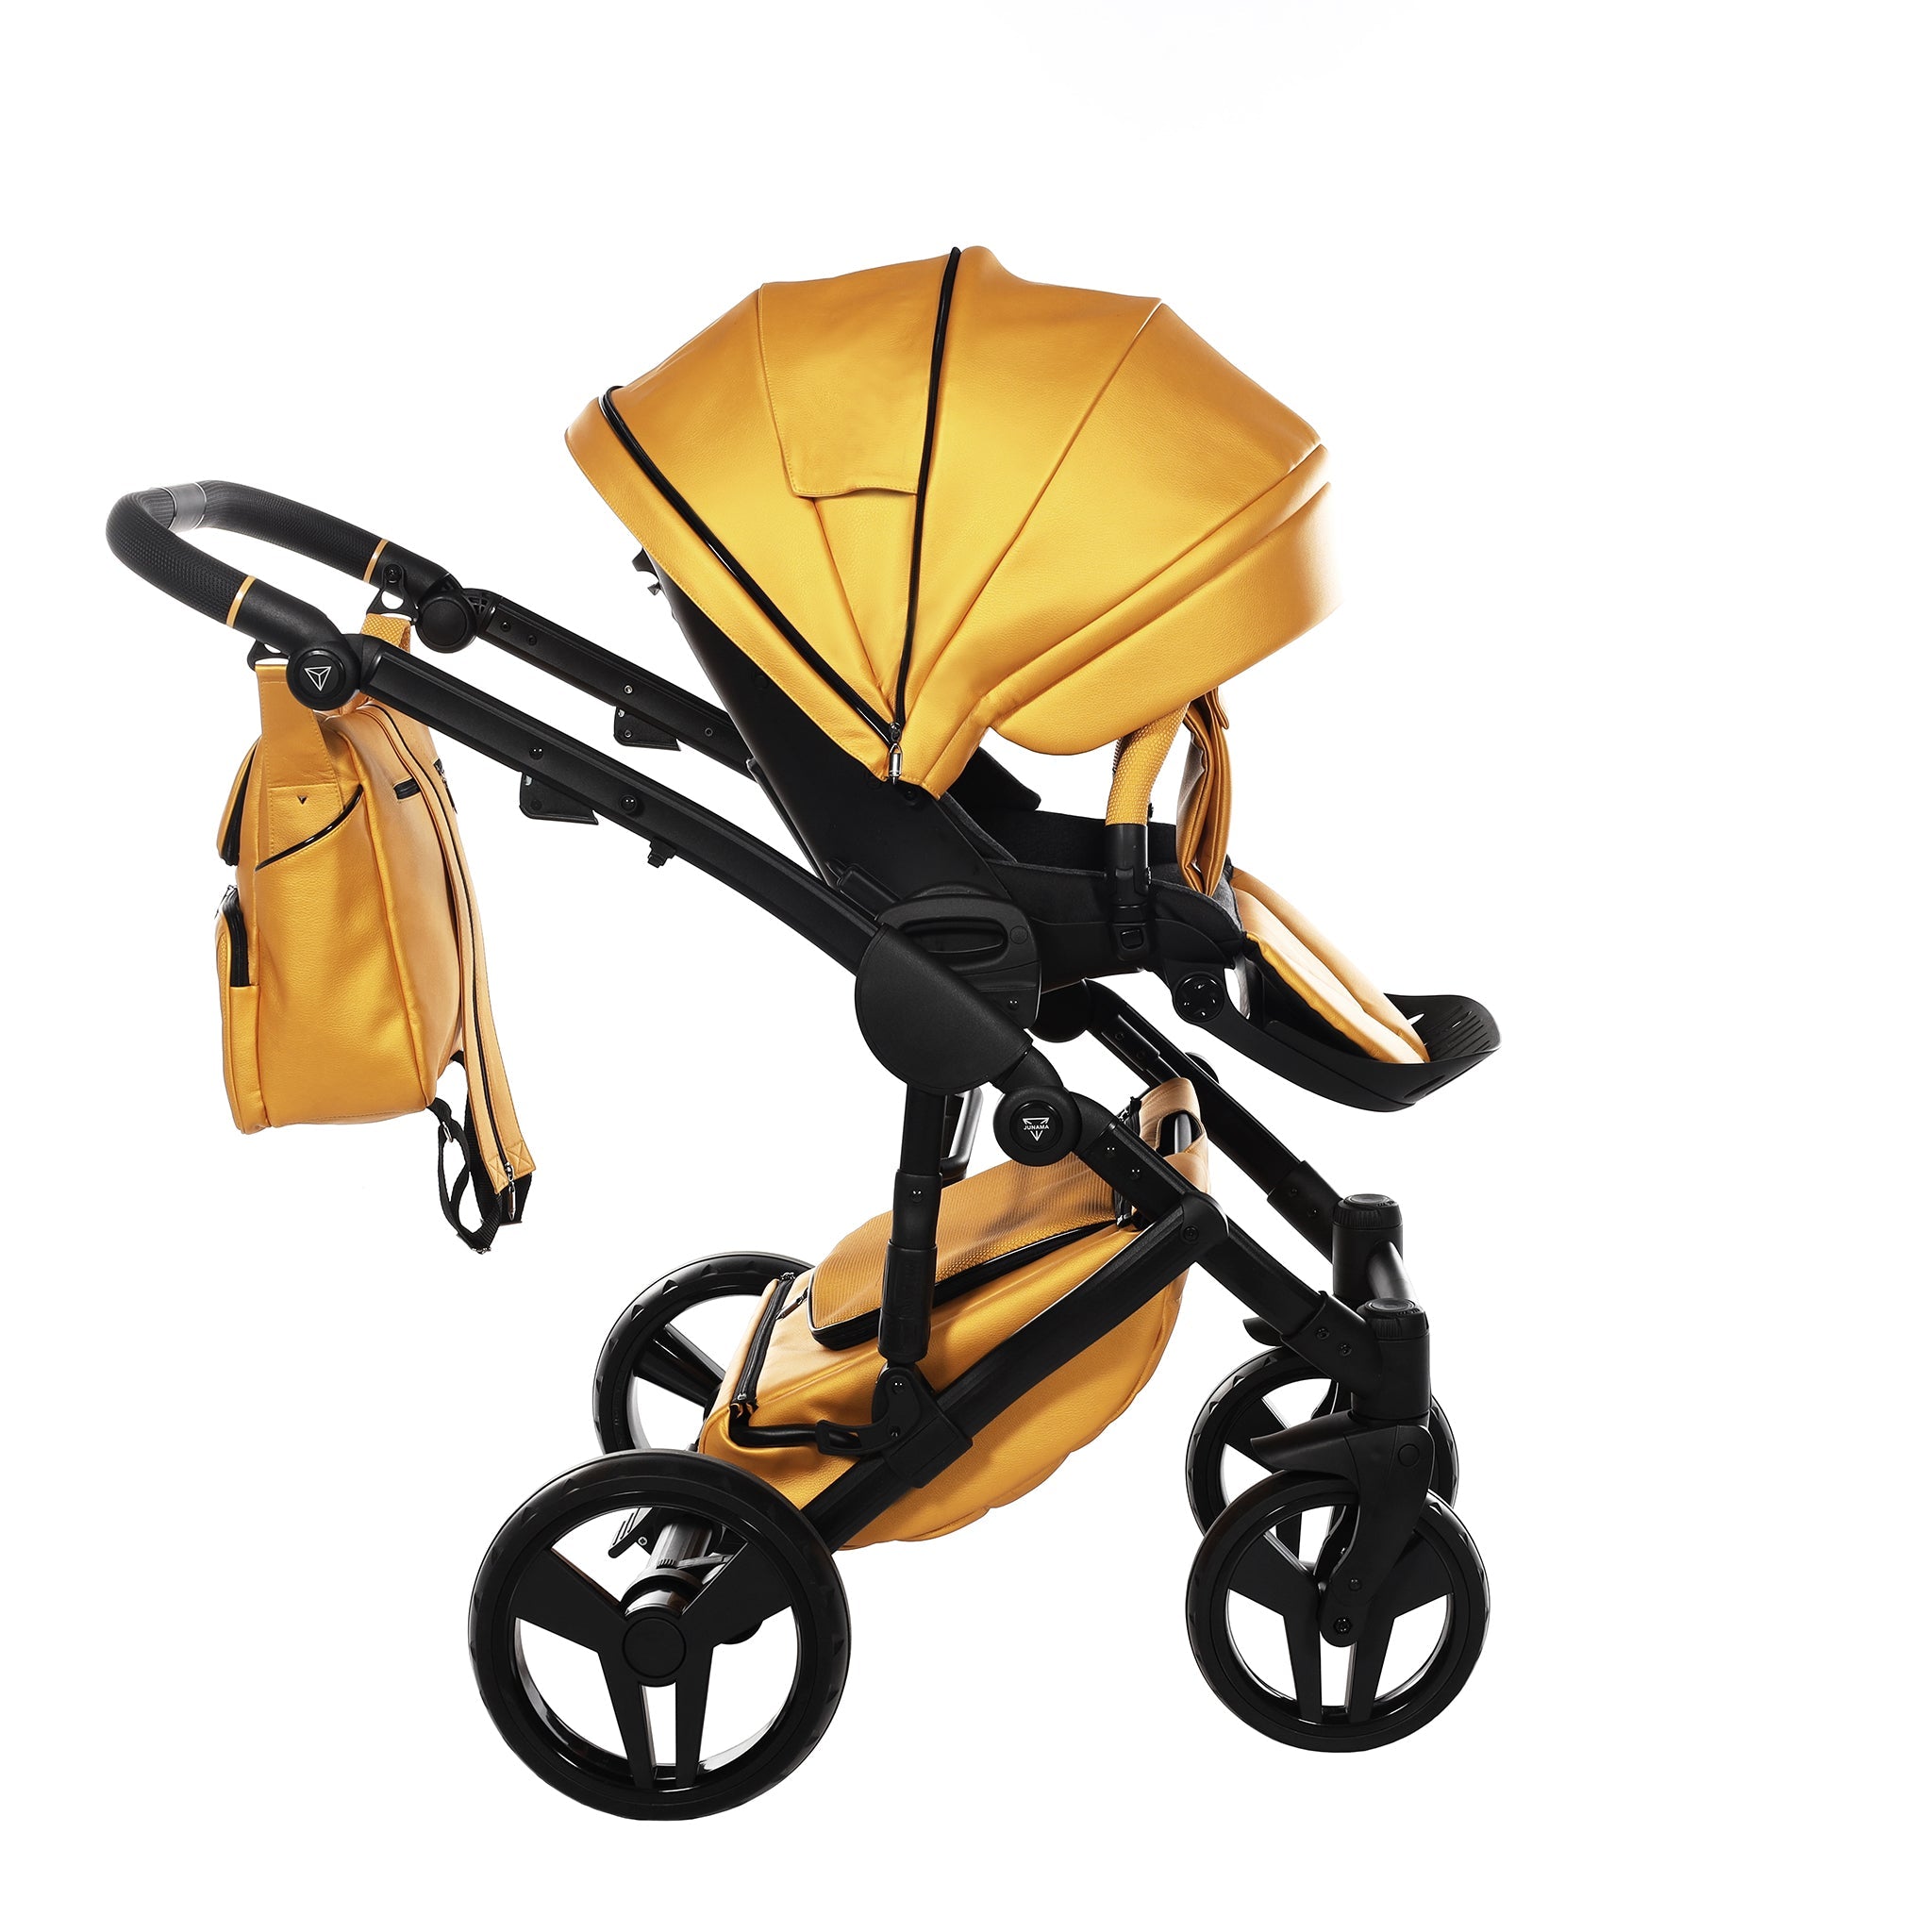 Junama S Class, baby prams or stroller 2 in 1 - Yellow and Black, Code number: JUNSC03